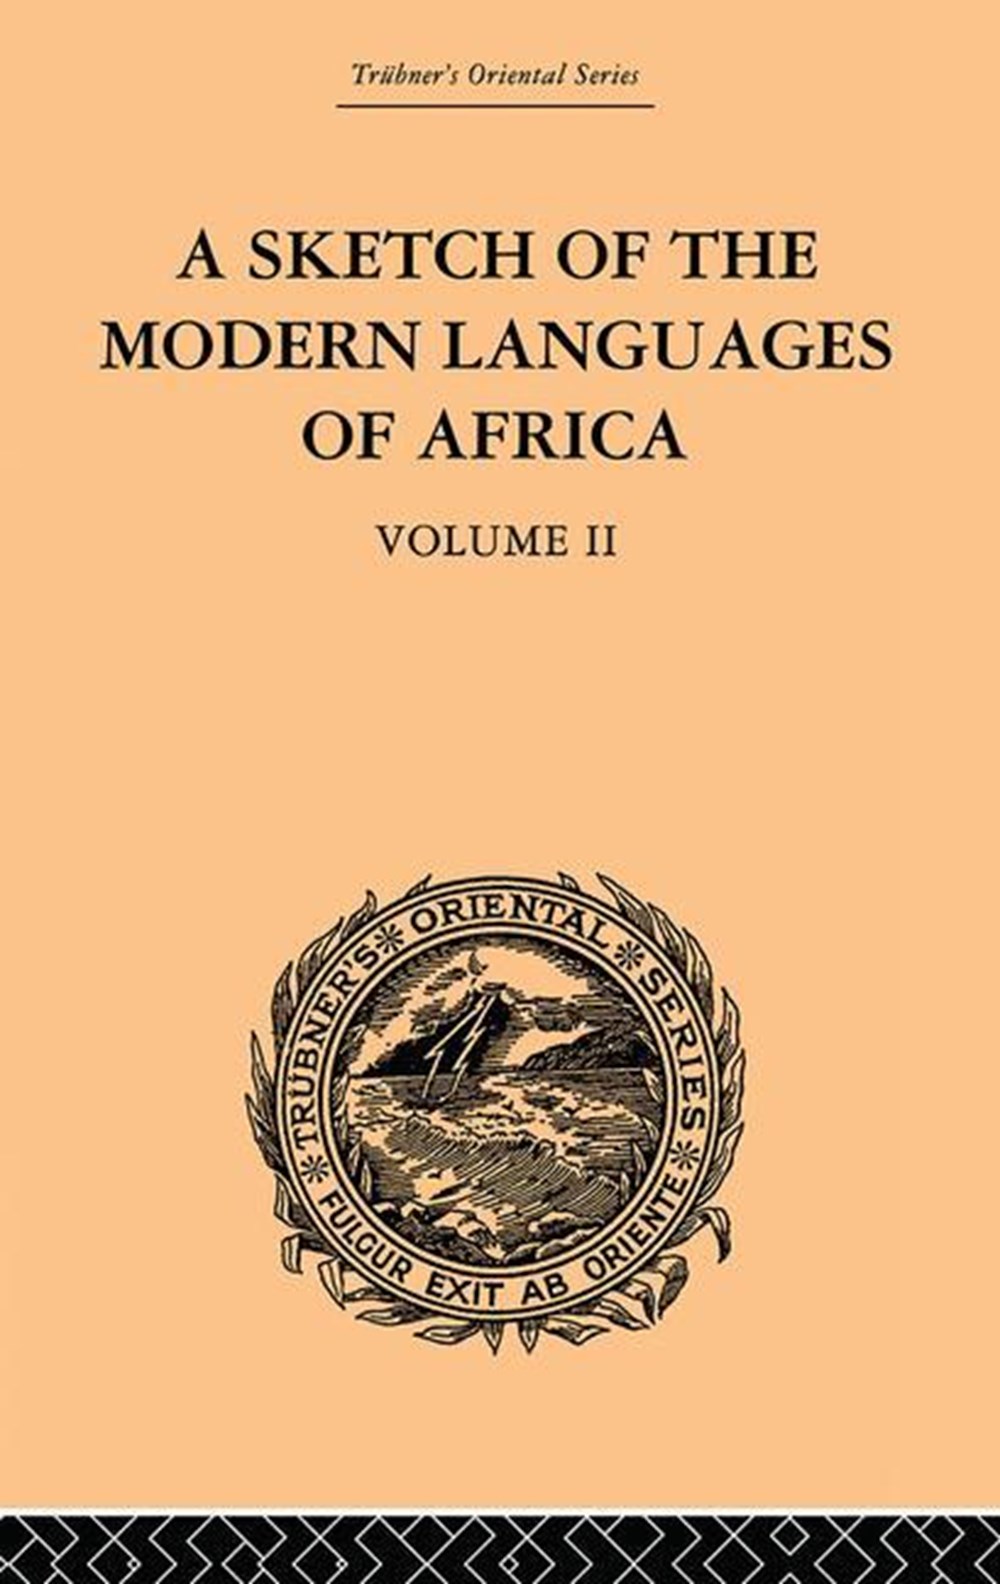 Sketch of the Modern Languages of Africa: Volume II